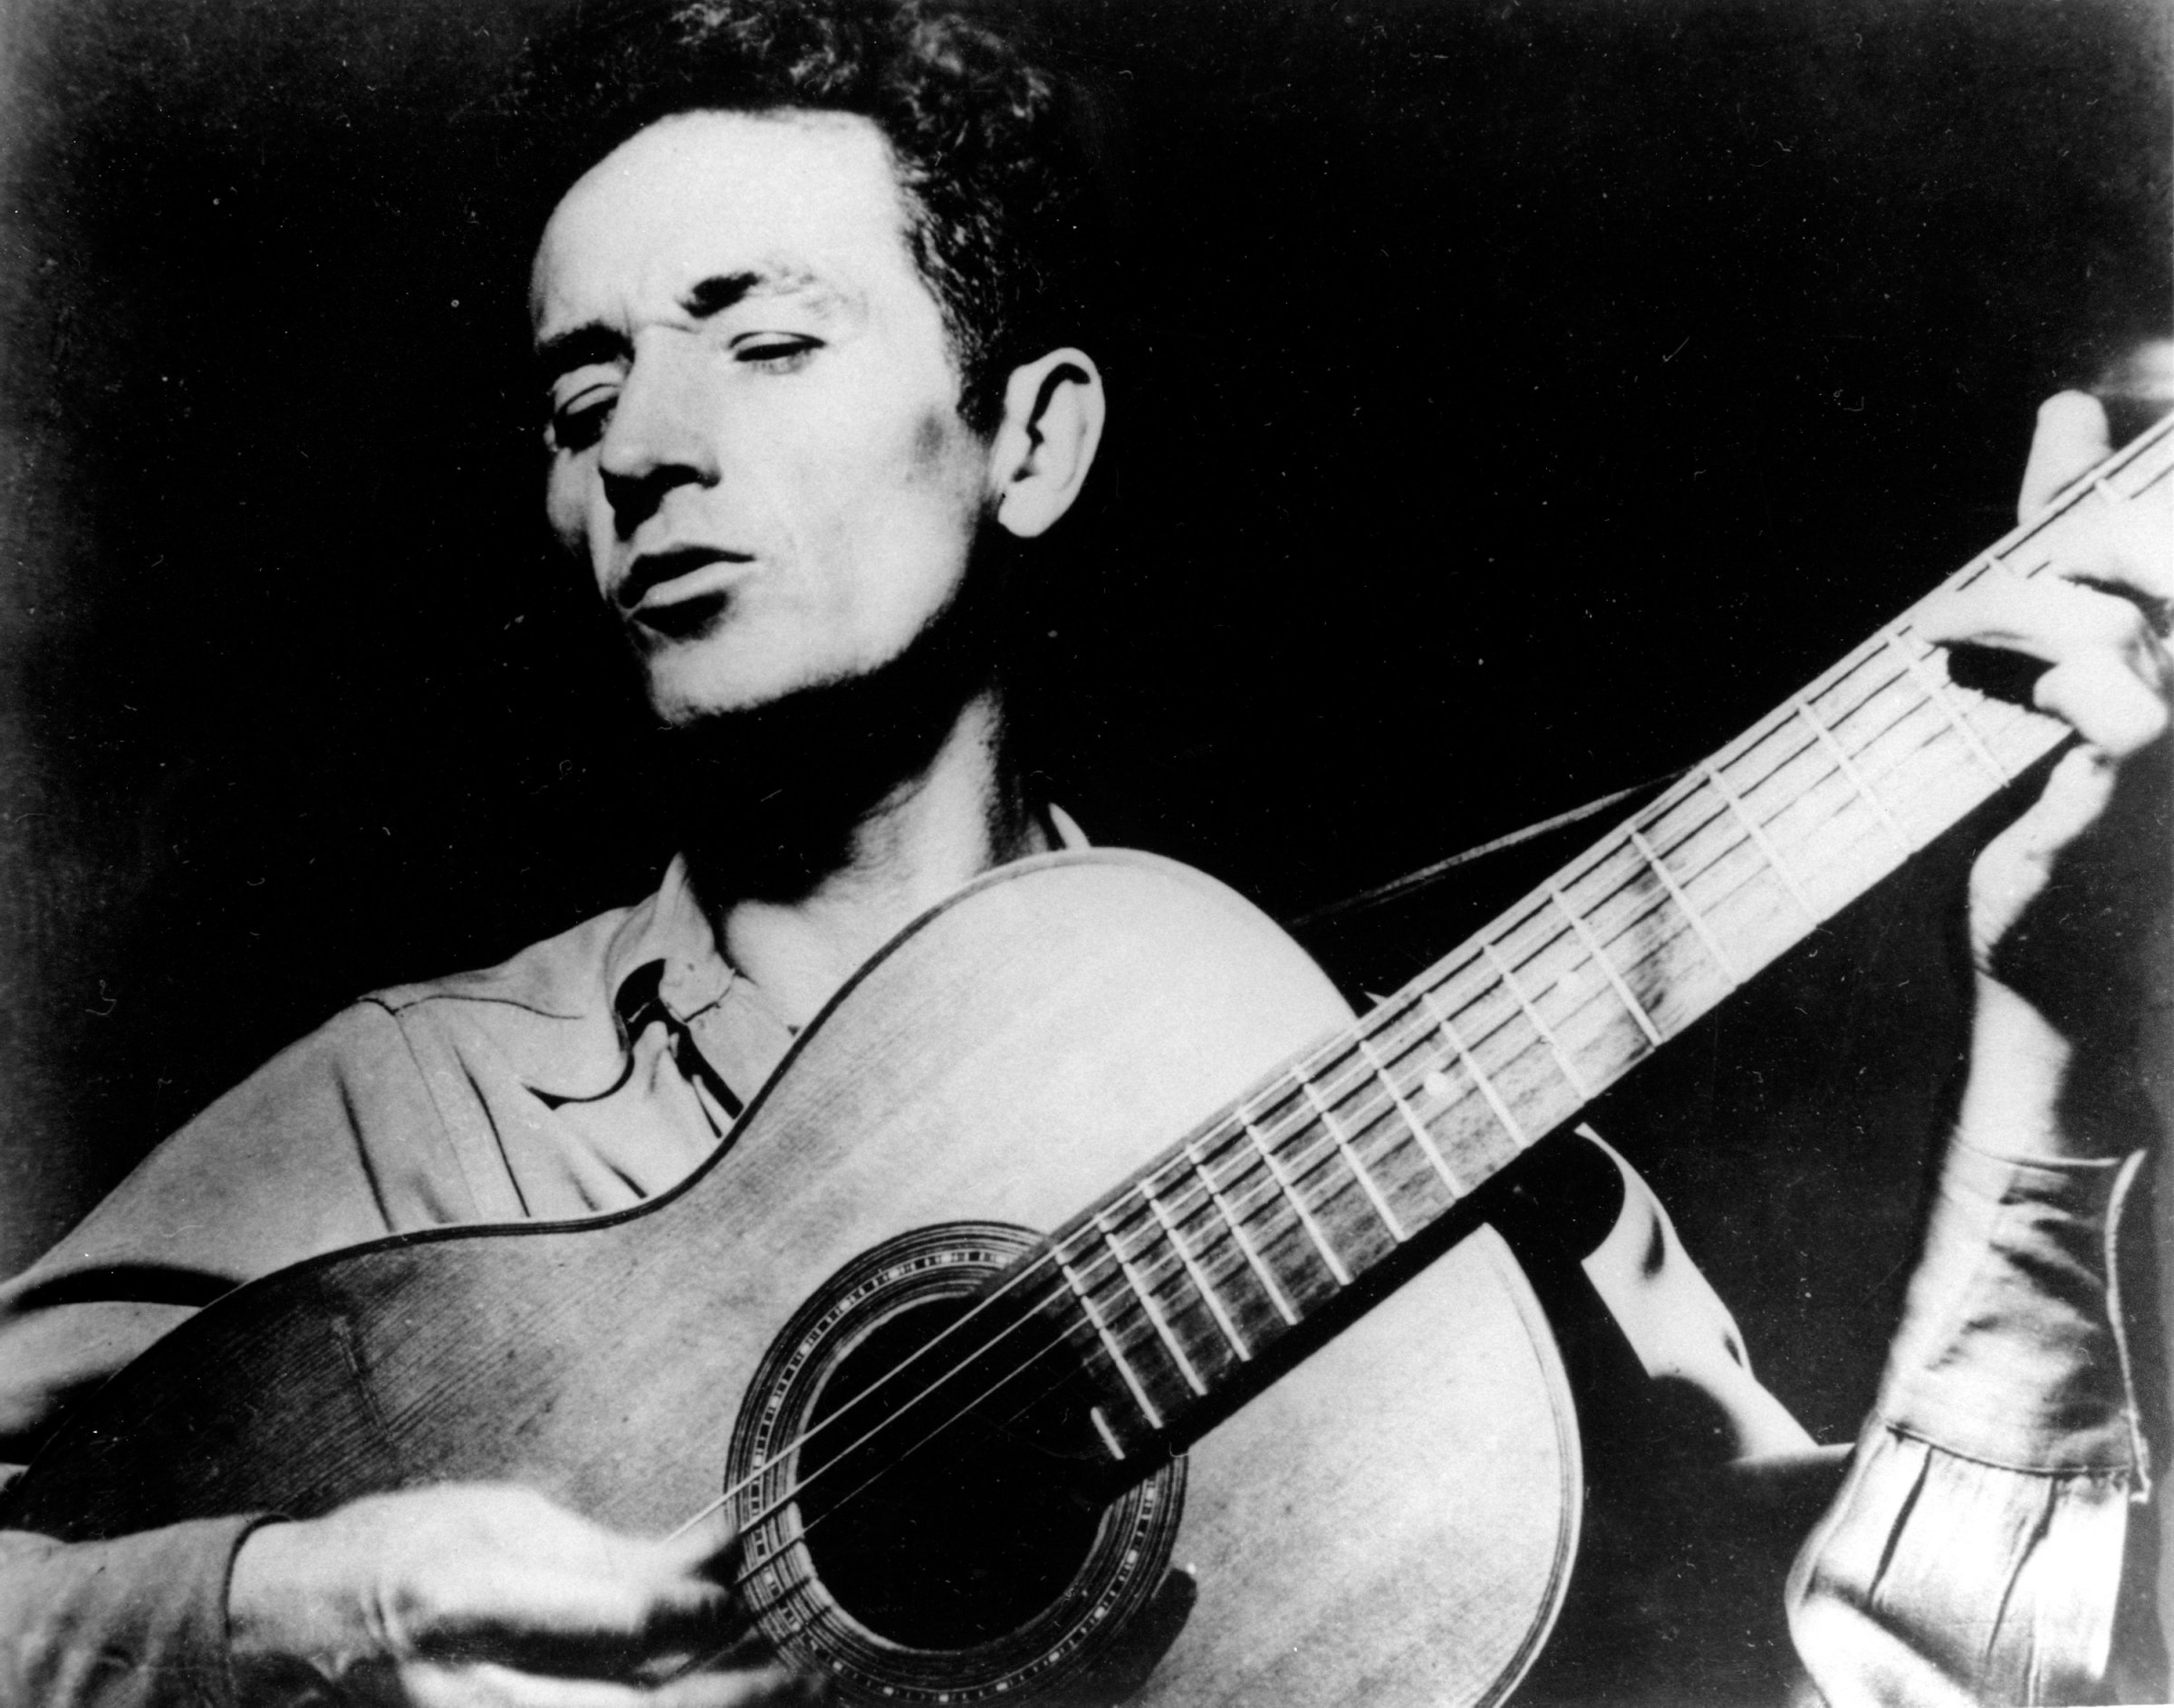 Folk singer, Woody Guthrie, singing a song and playing his guitar.